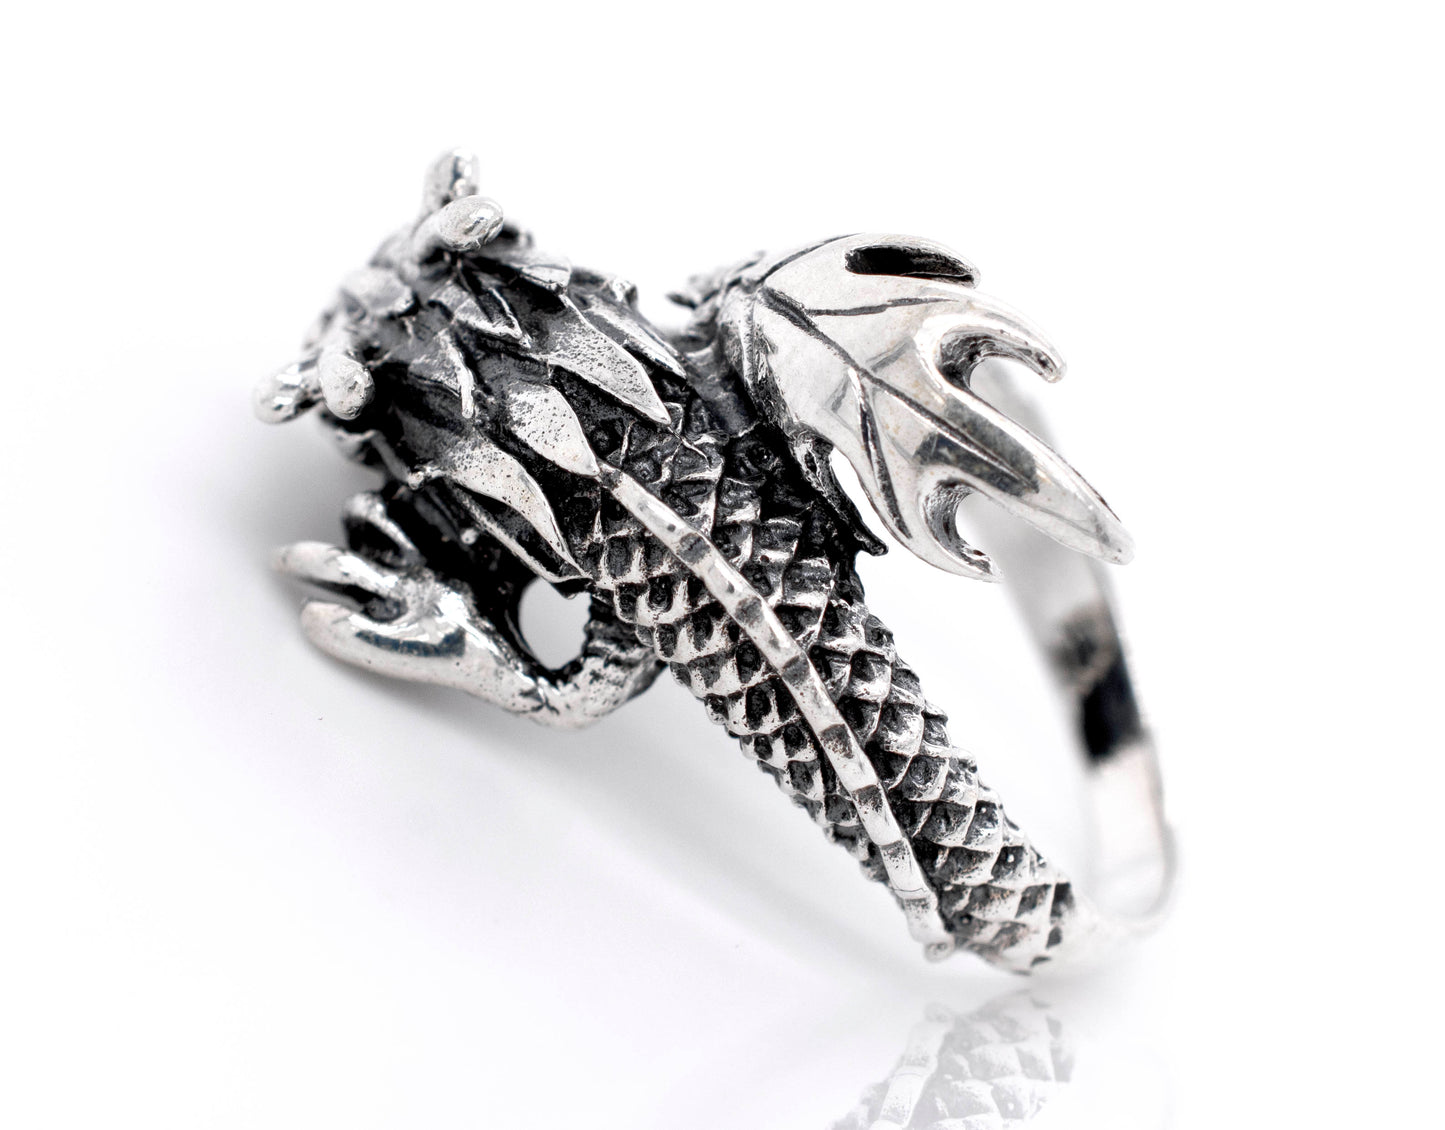 A Striking Silver Dragon Ring made of sterling silver.